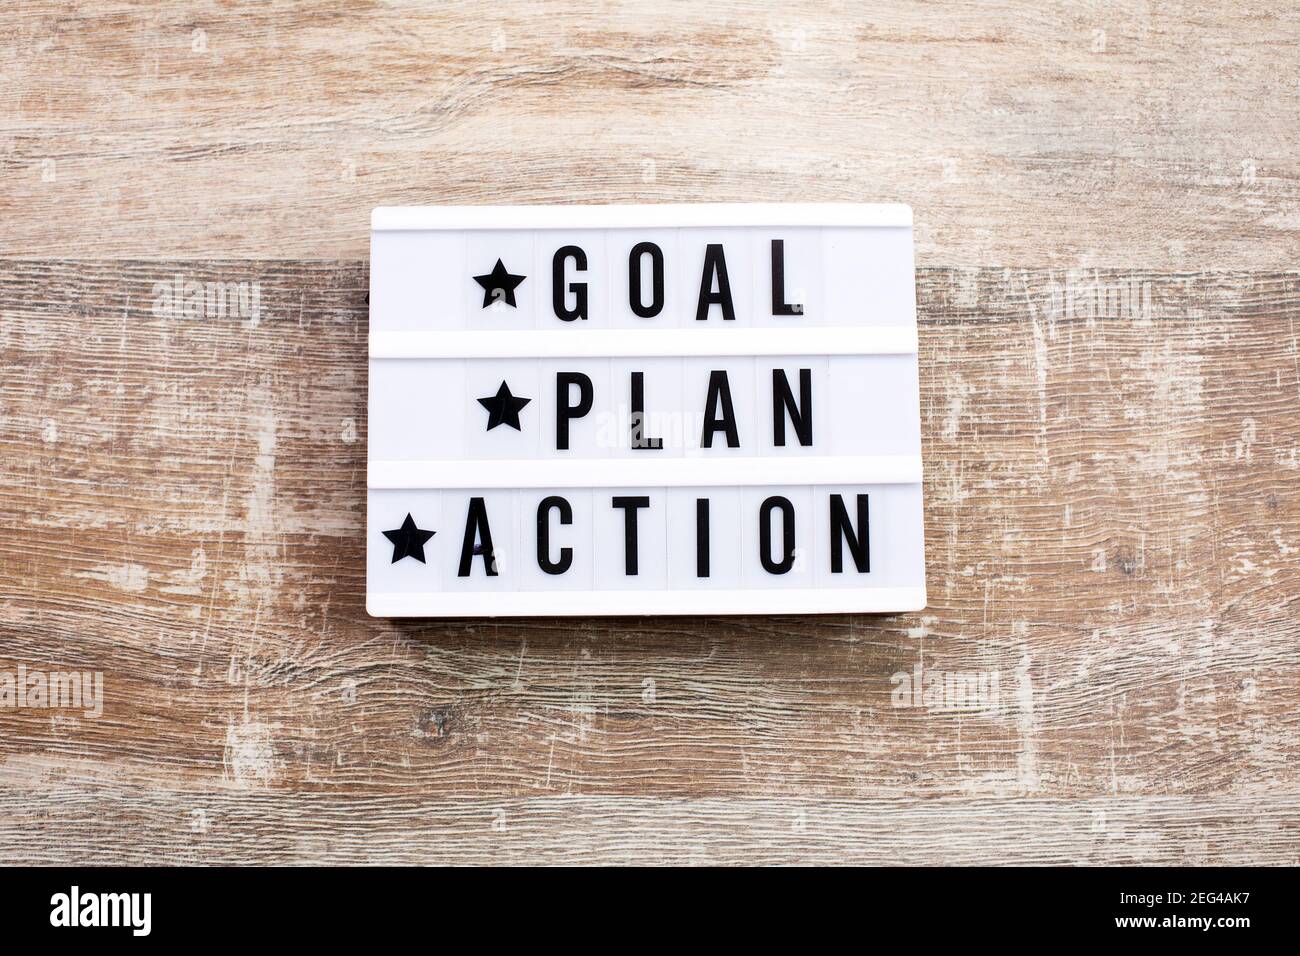 Goal, Plan, Action text on light box on wooden table. Business ...